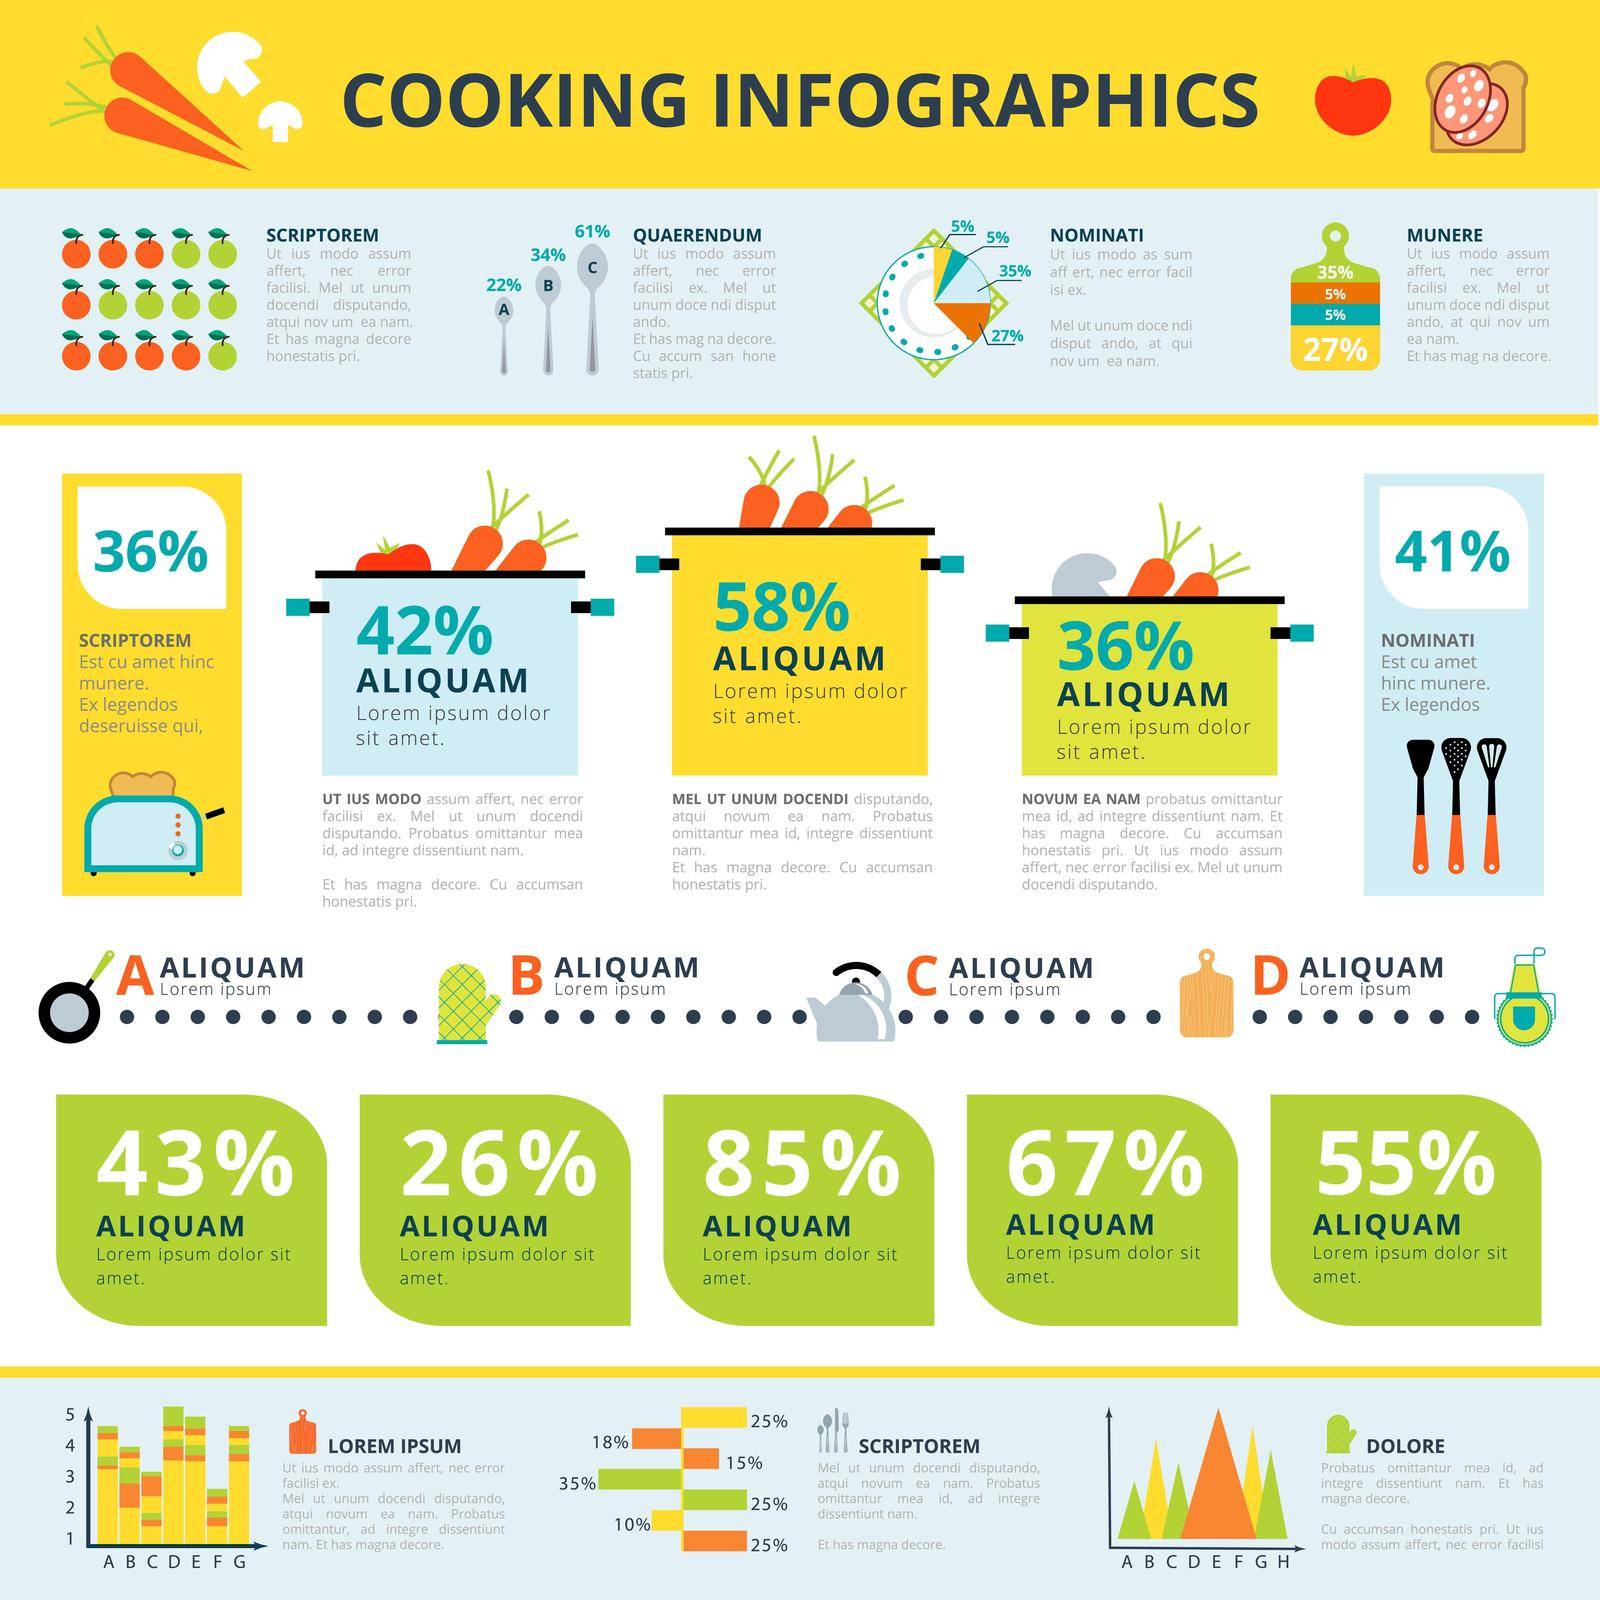 Home cooking healthy nutrients consumption and modern kitchen appliances trends statistics infographic report banner abstract vector illustration